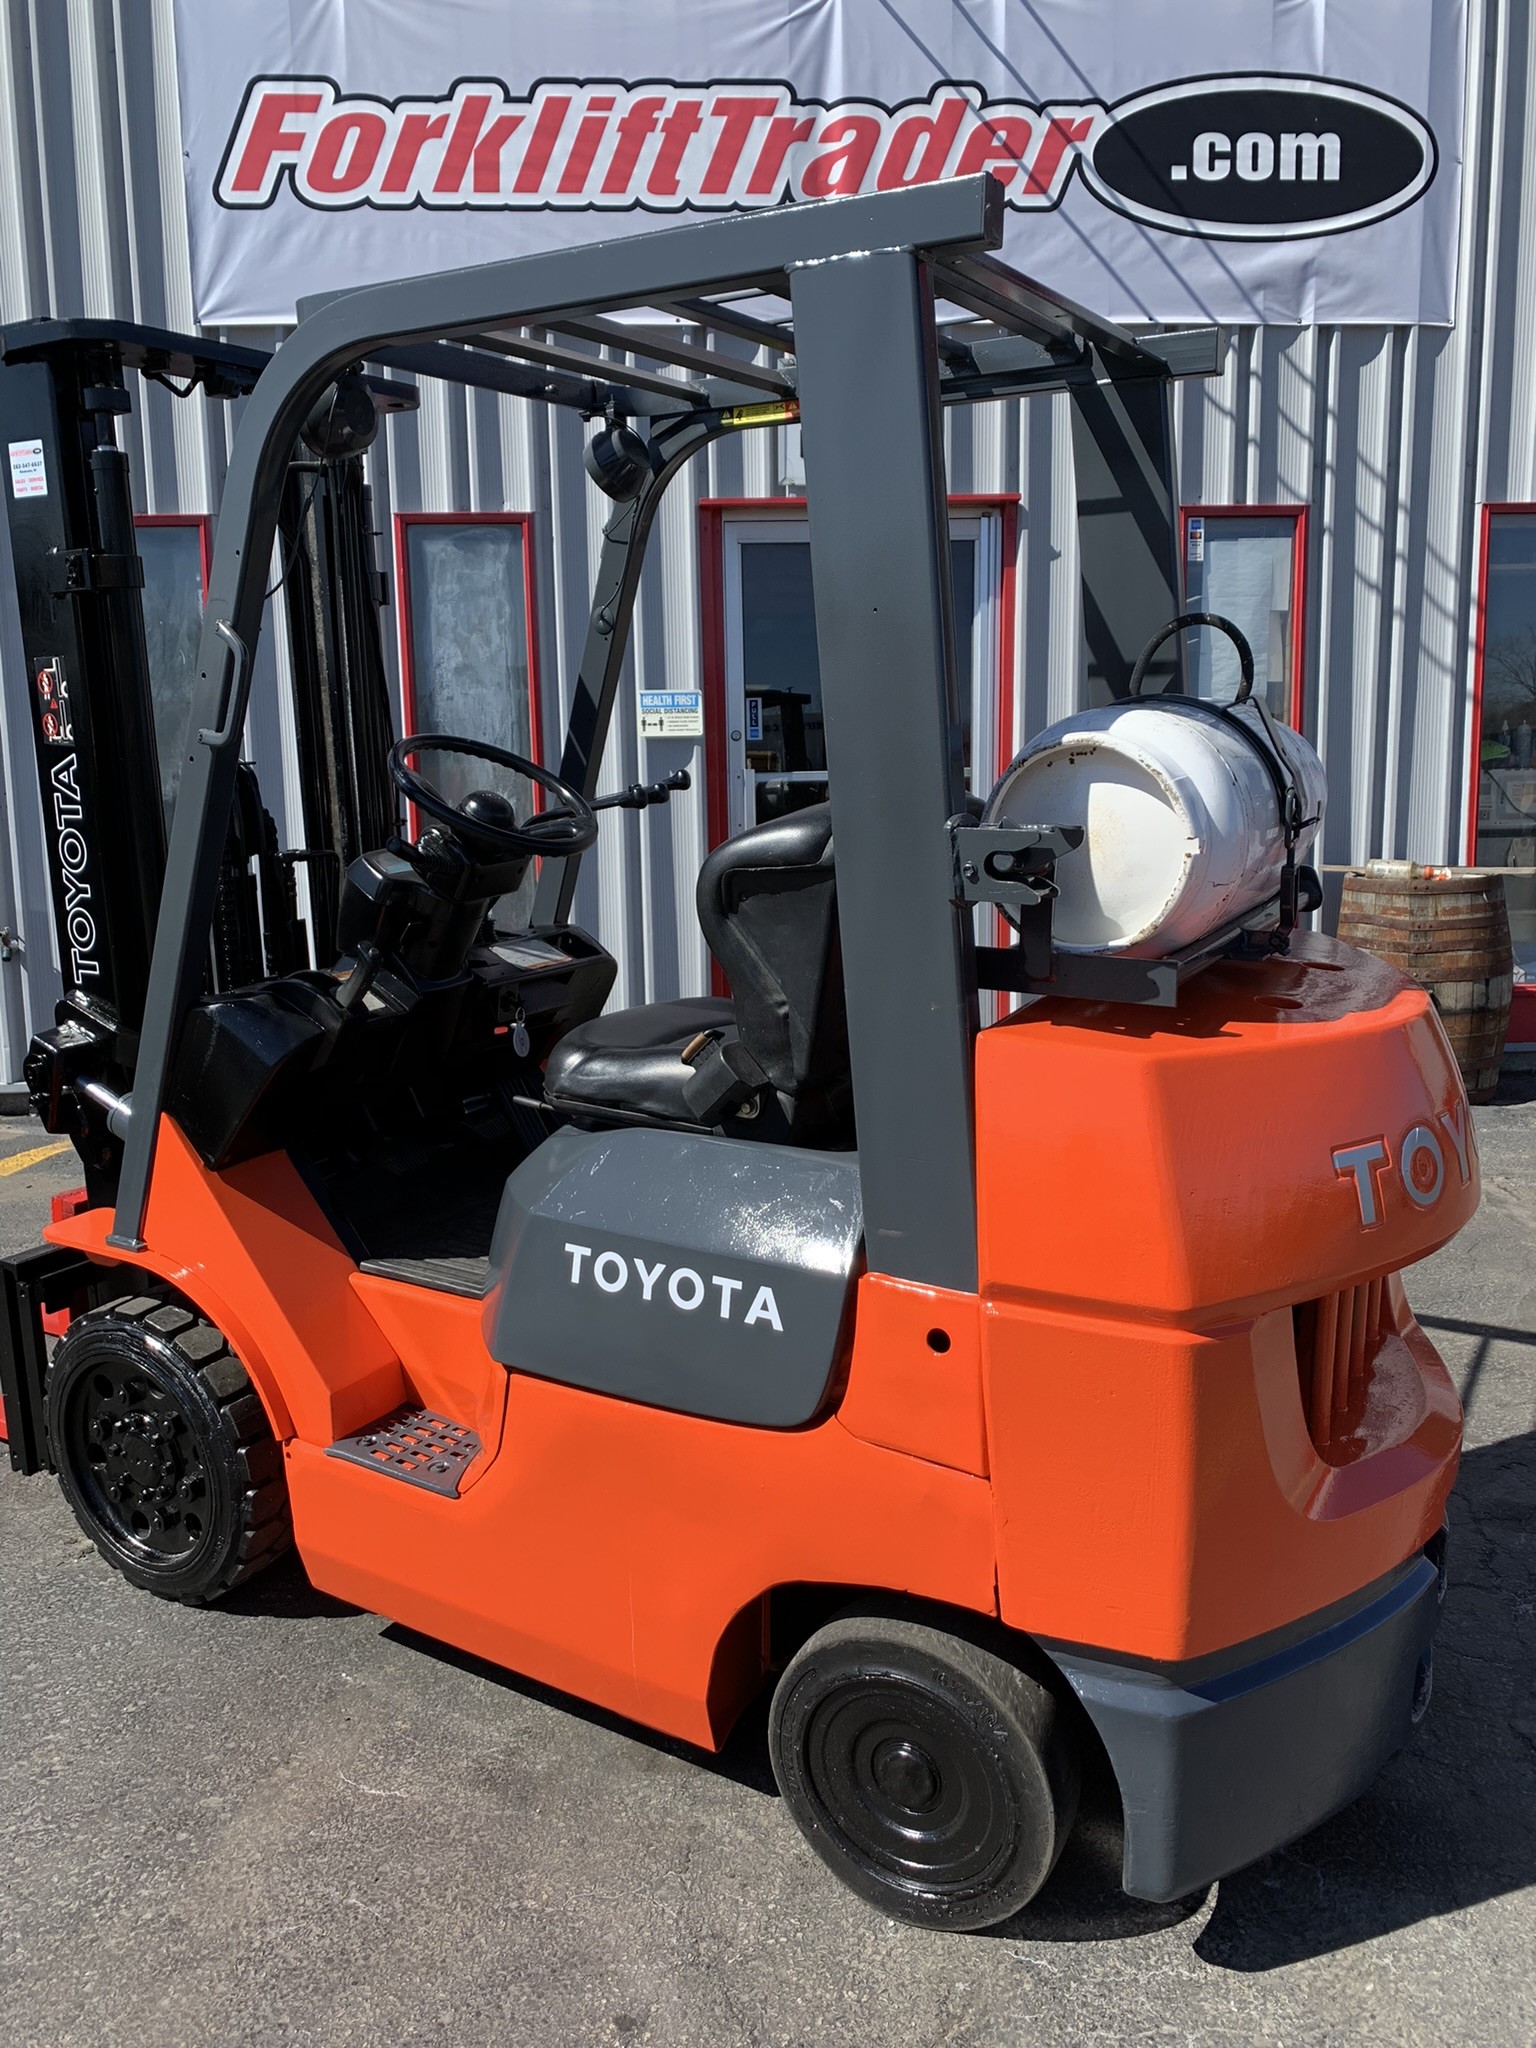 5,000lb capacity 2006 toyota forklift for sale